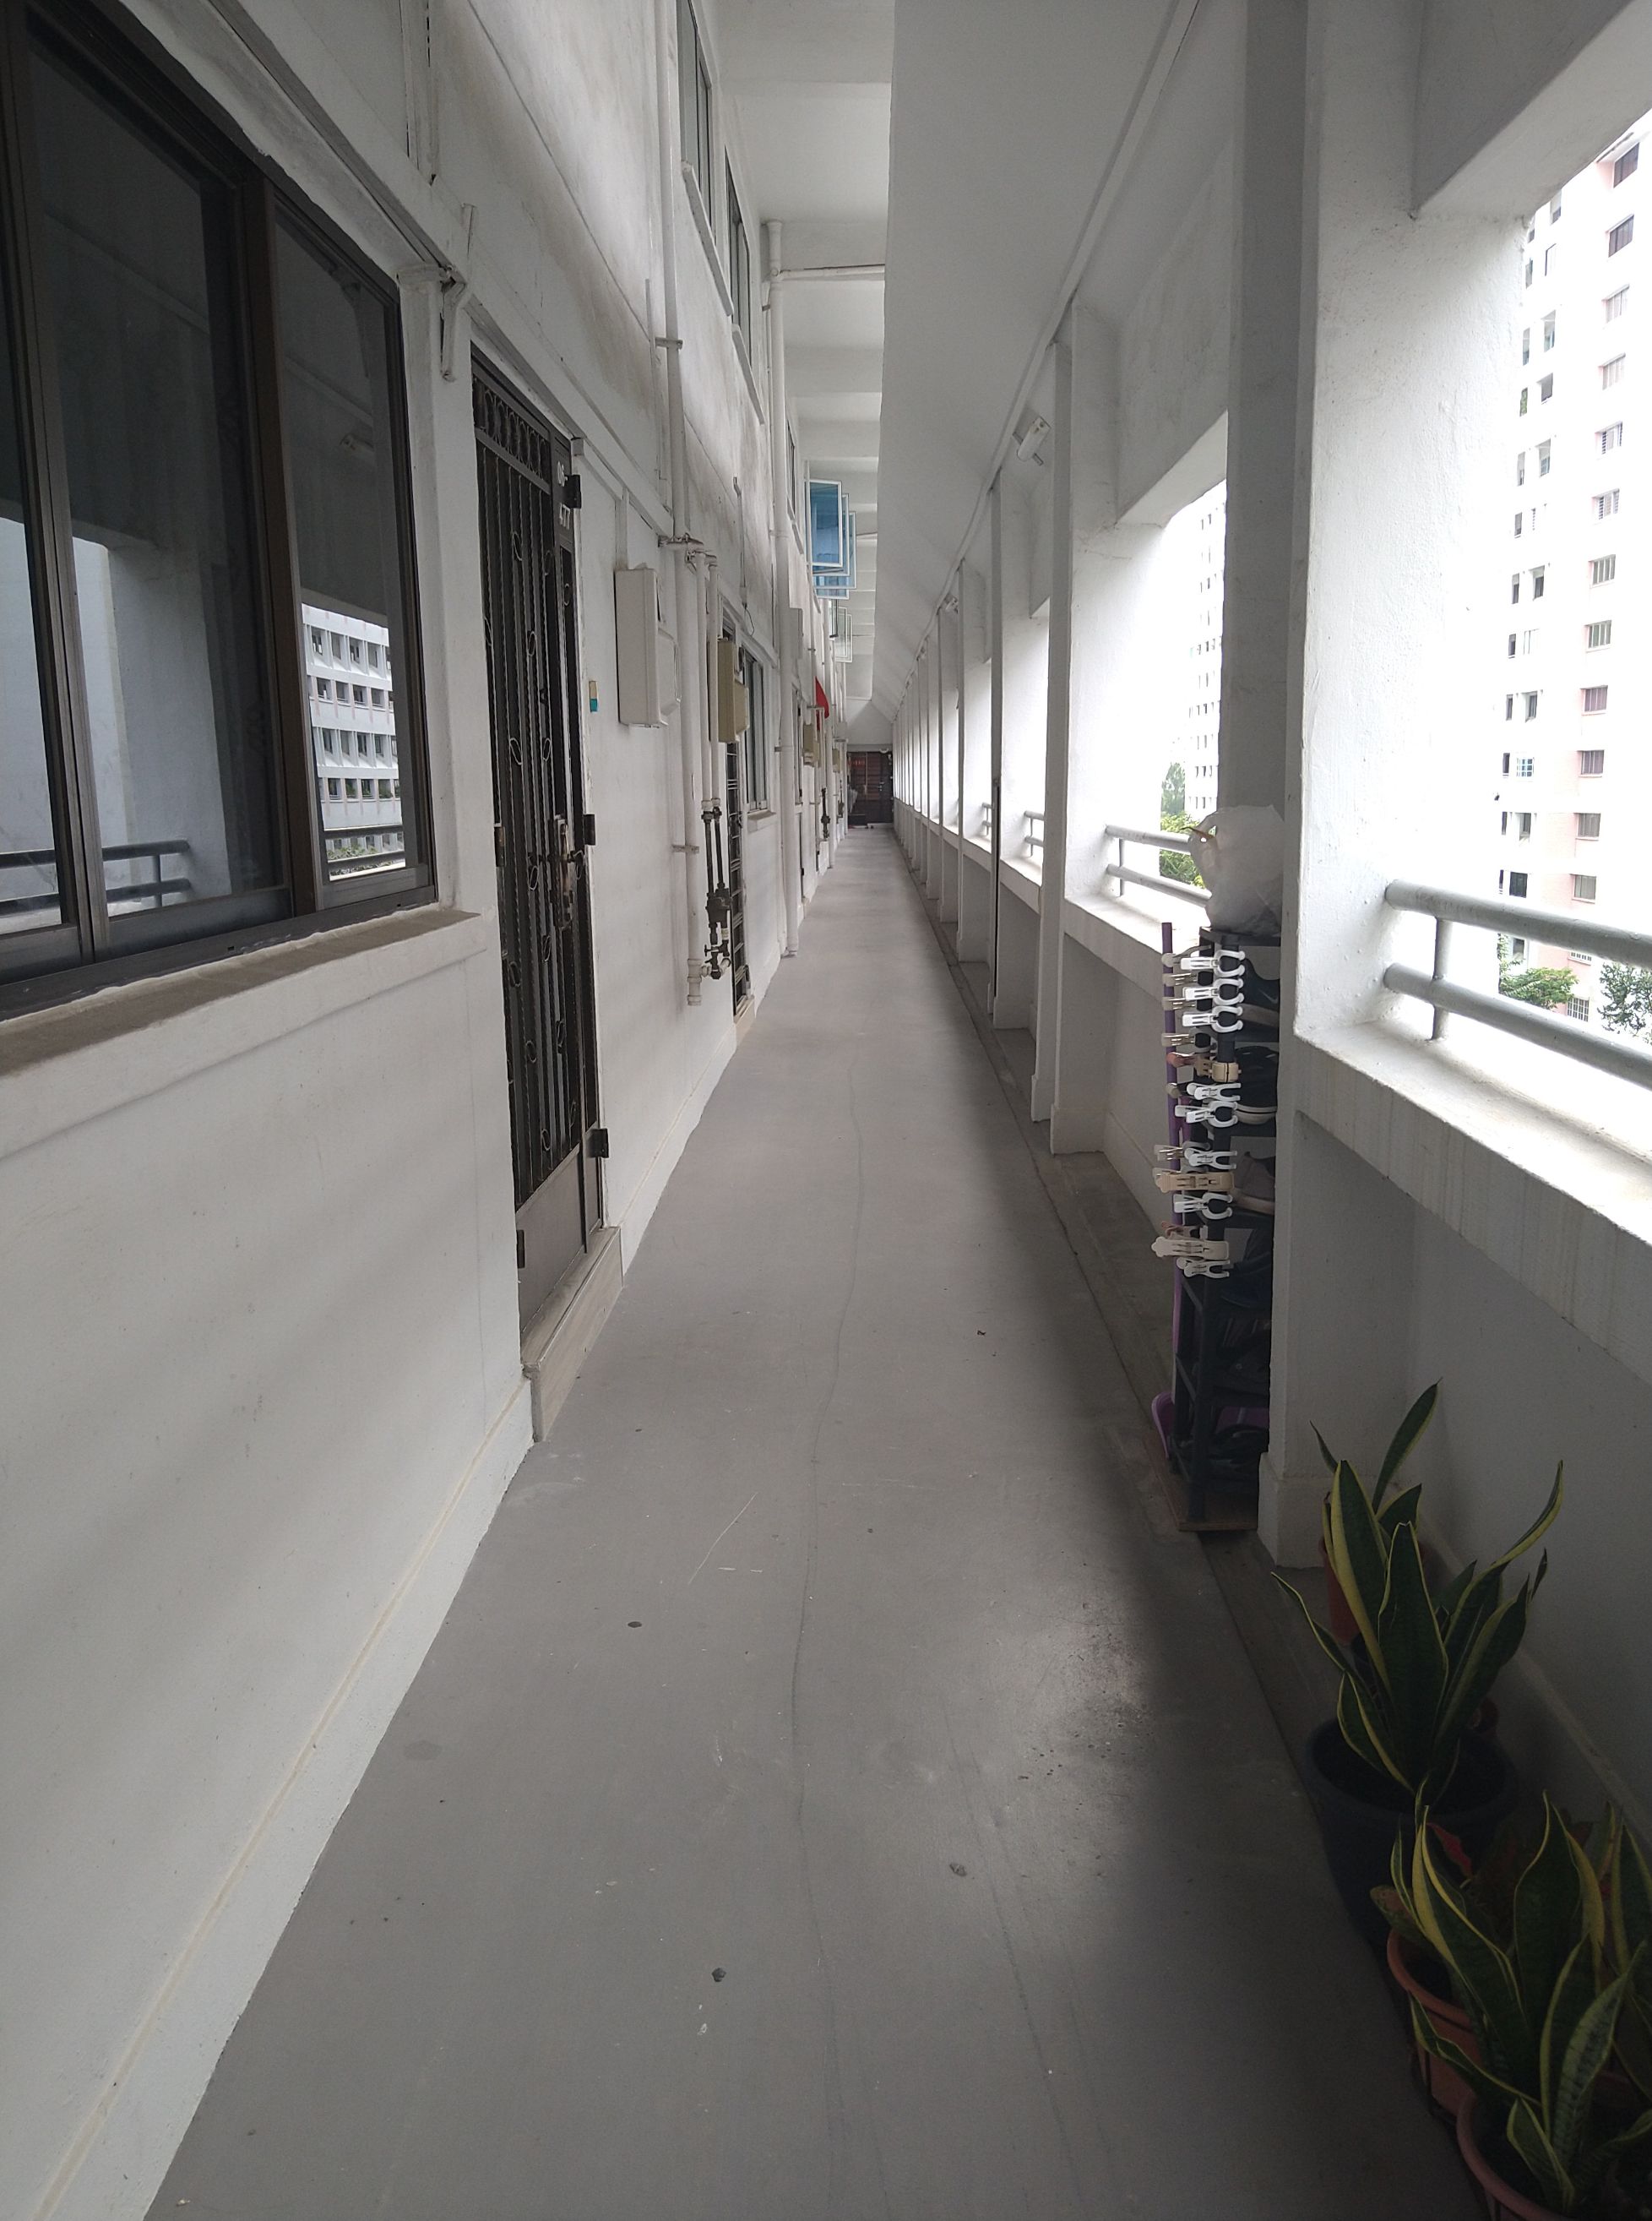 Old Style Common Corridors Our Floor is Clean and Empty Some Floors There is a Jungle of Potted Plants 2